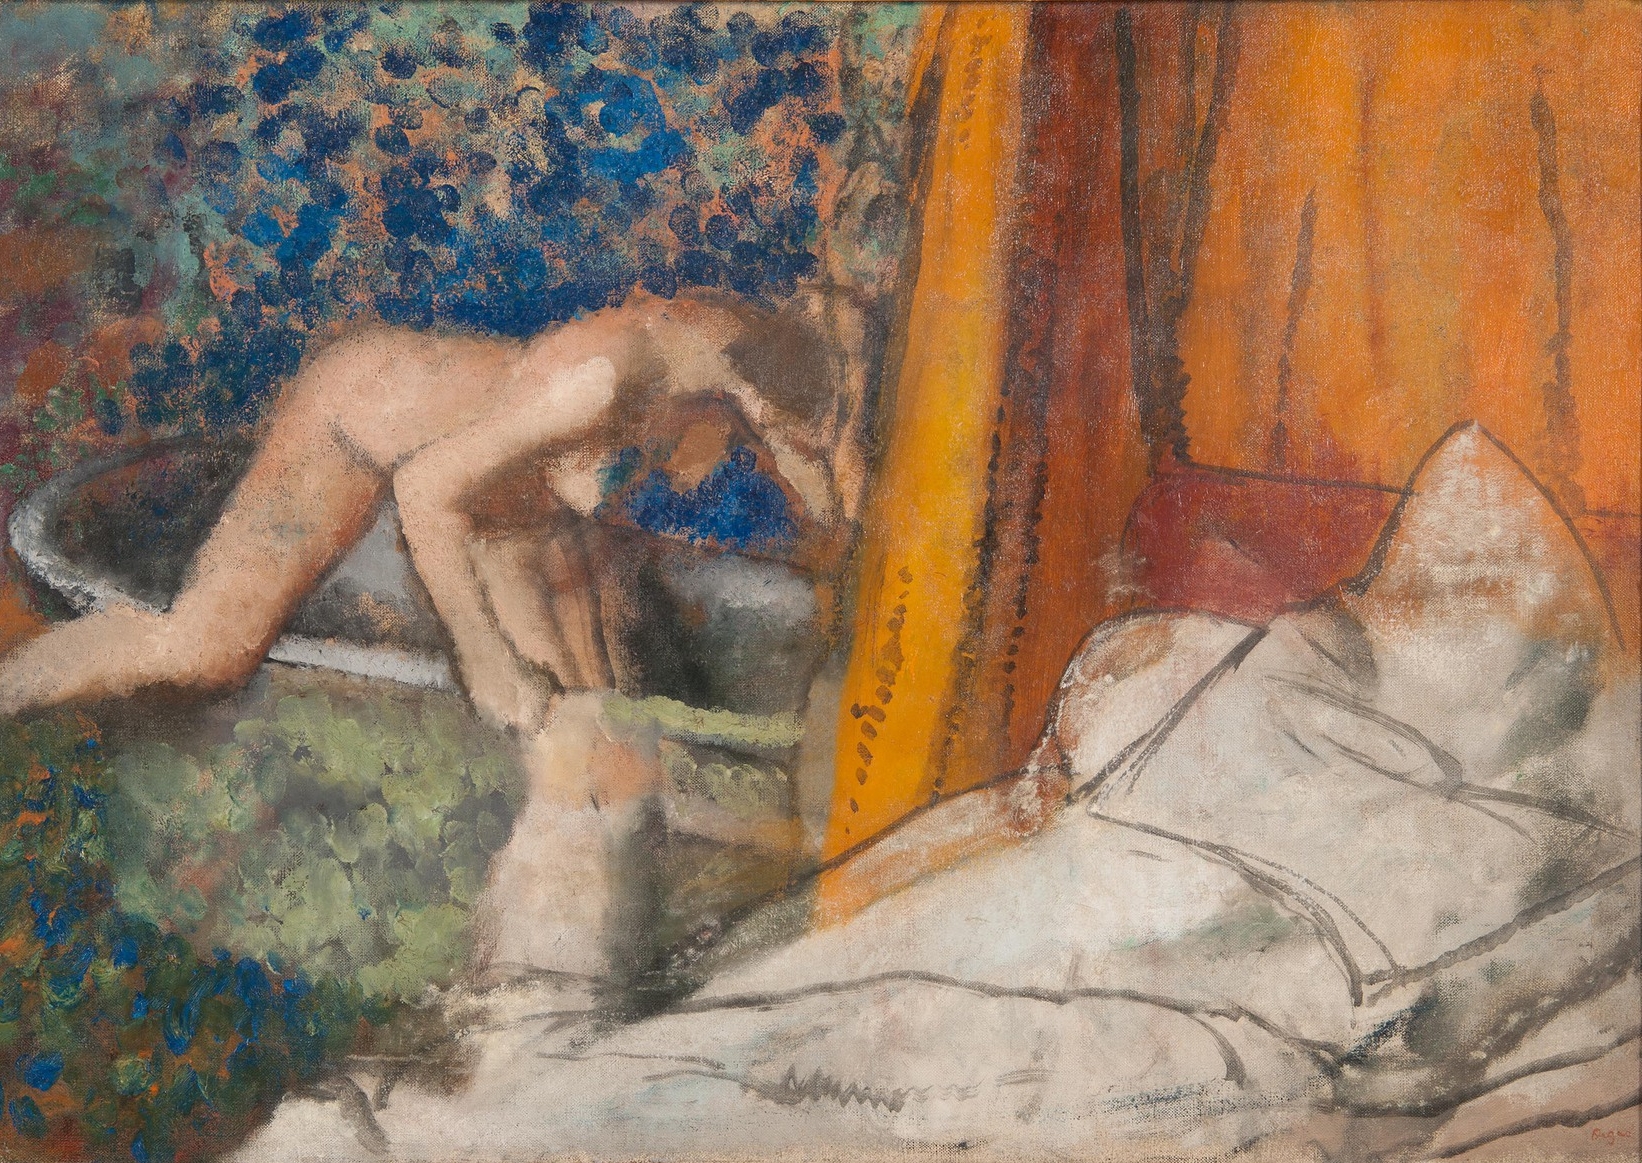 a painting of a woman getting into a bath